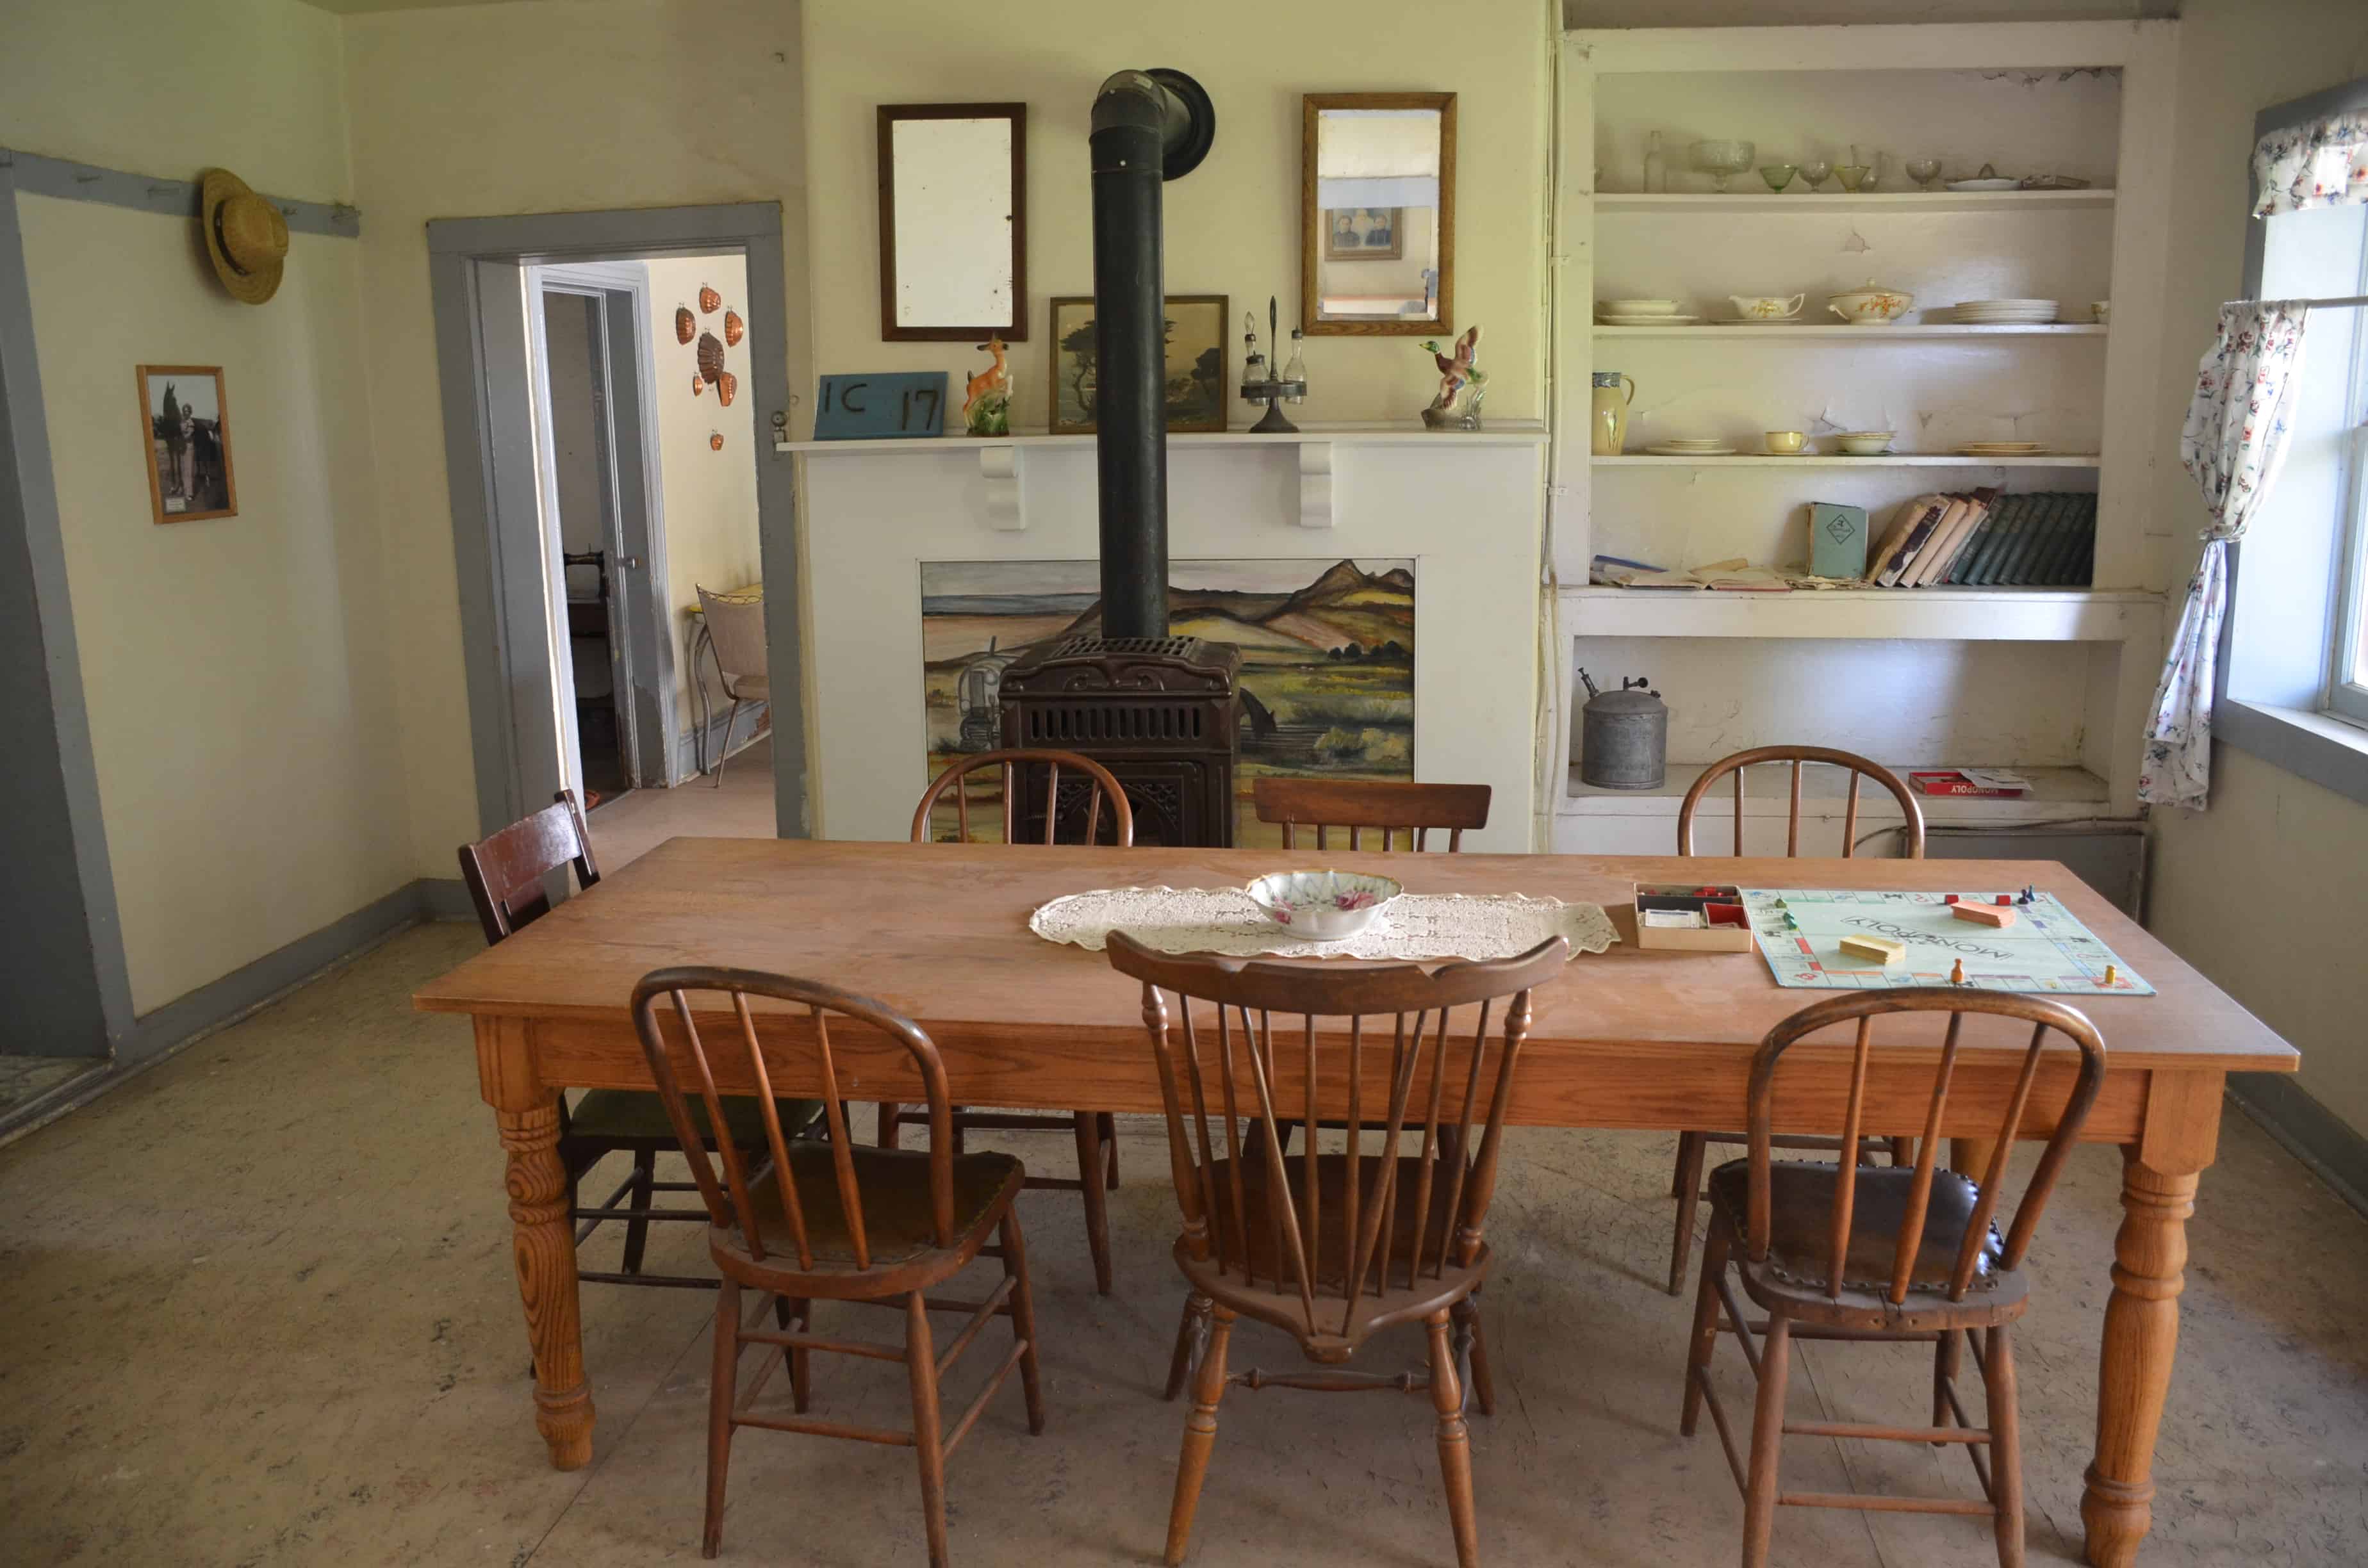 Dining room of the Garr home at Fielding Garr Ranch at Antelope Island State Park in Utah